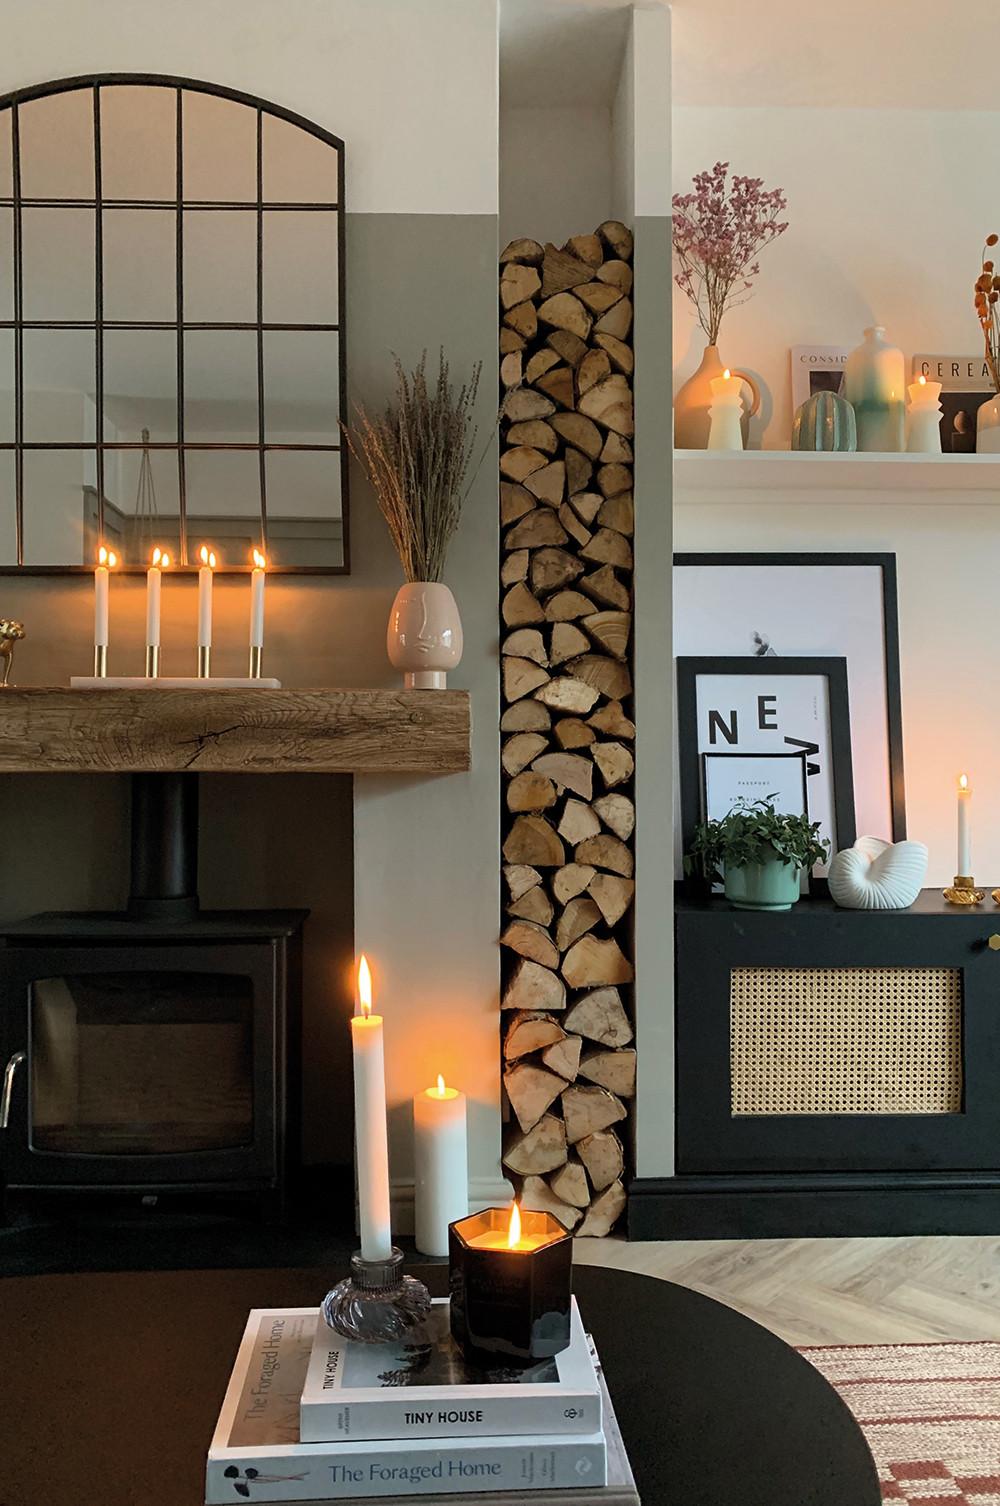 Fireplace with candles, mirror and vases